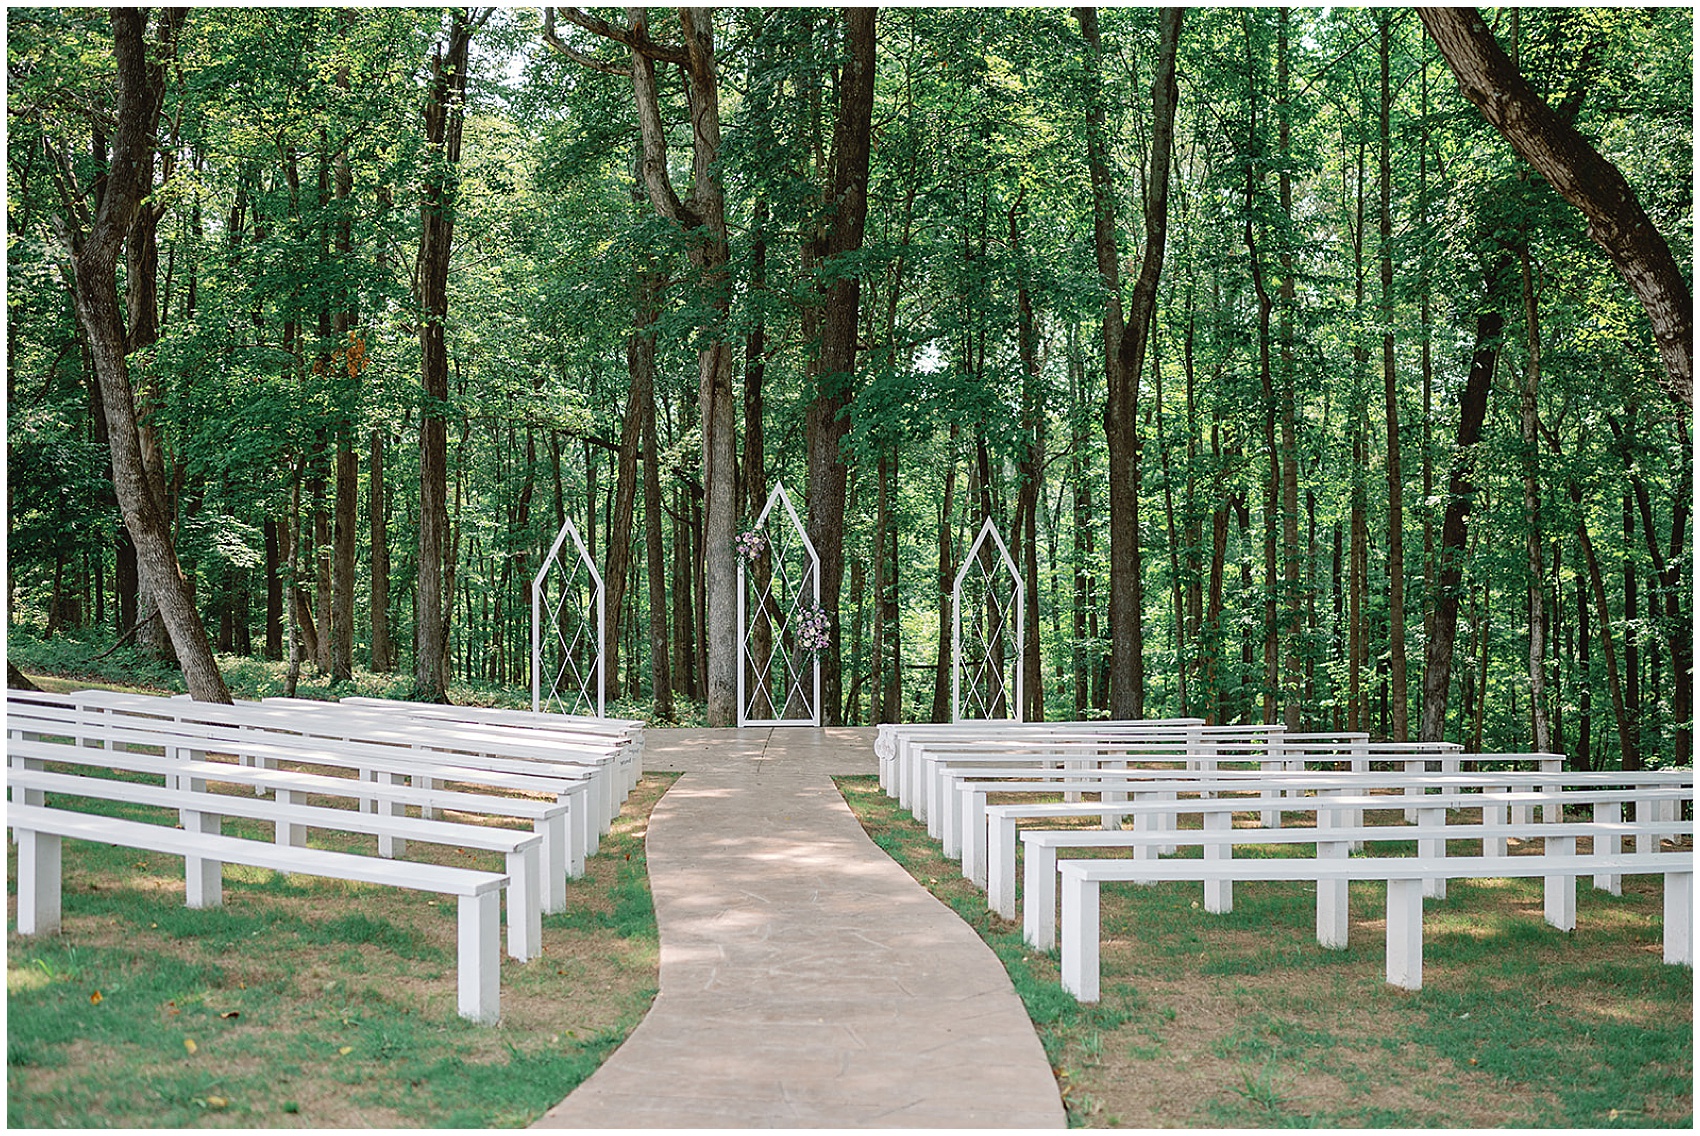 Details of an outdoor hickory meadow charlotte tn wedding reception location with wooden benches in the woods